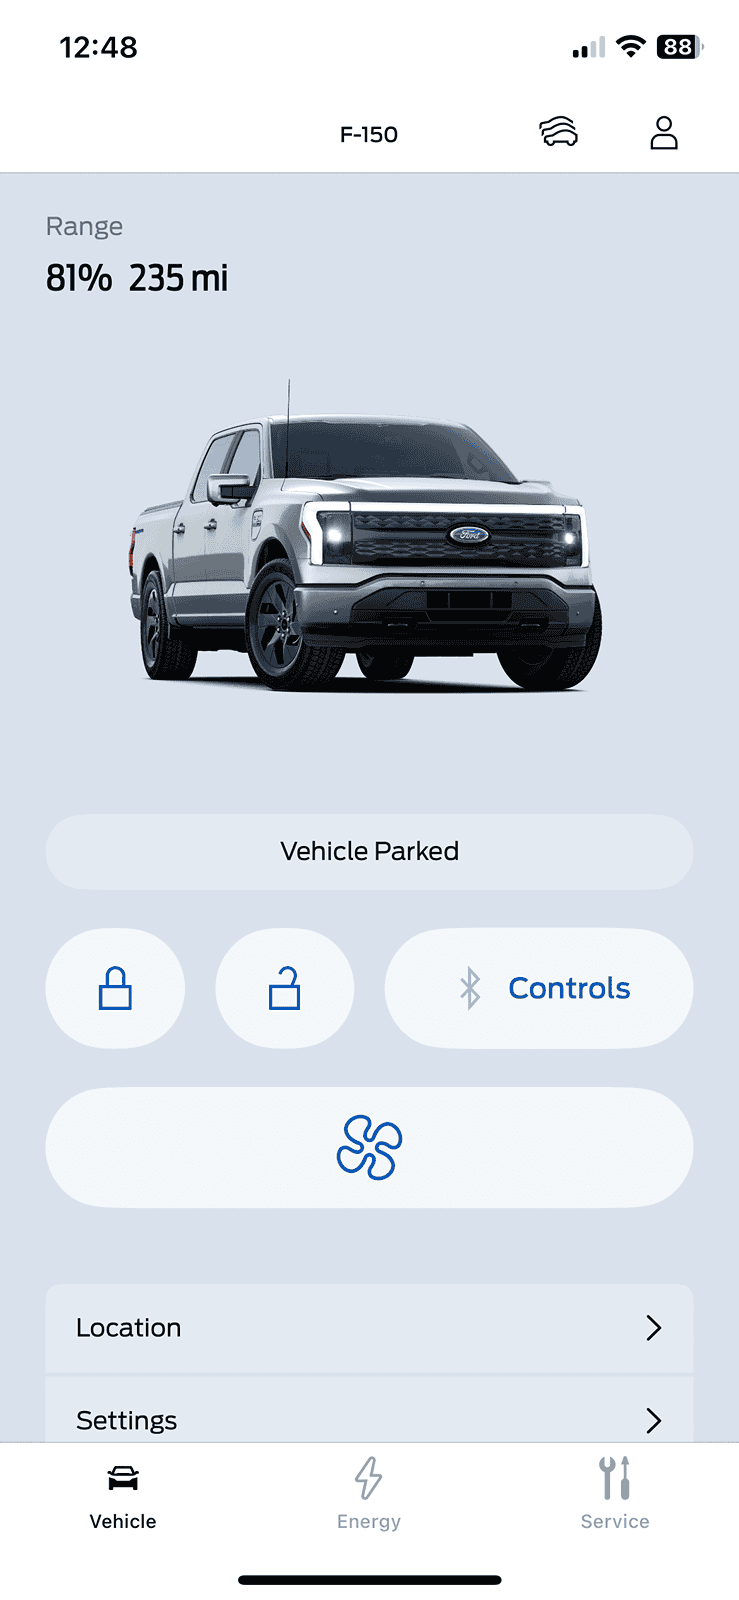 Ford F-150 Lightning FordPass Update 5.0.0 -- Limited Public Beta Release C5DDCCE3-080A-4629-AE69-374044939DC0